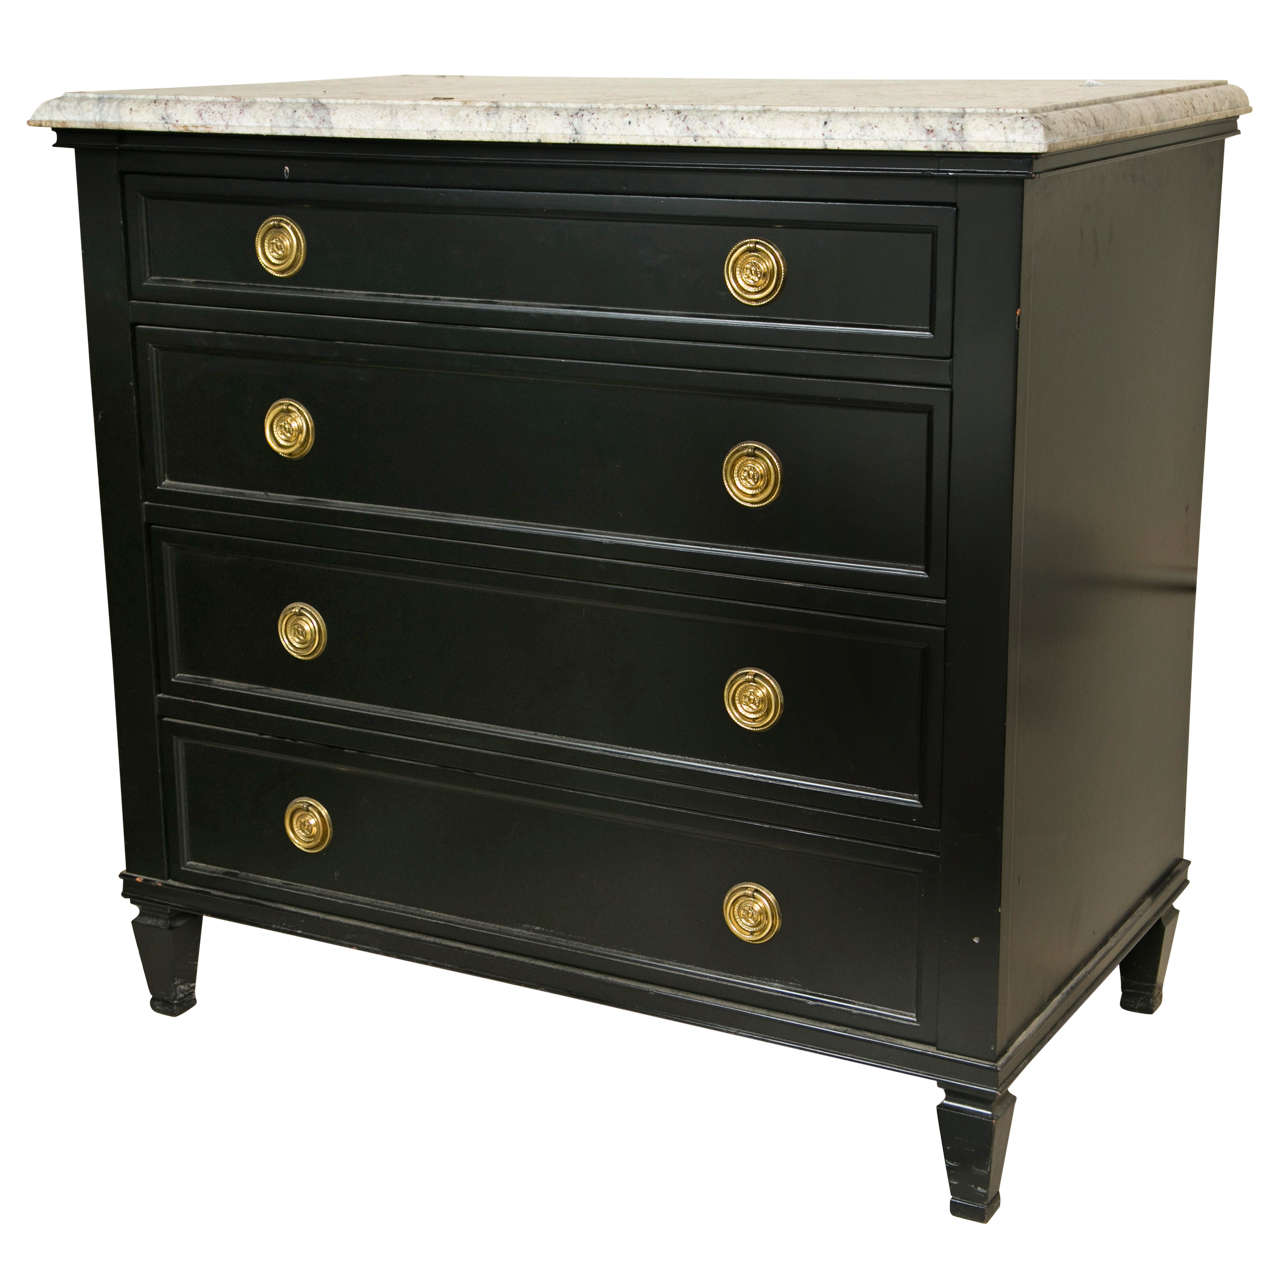 Featured image of post Modern Marble Top Dresser - How to add a faux marble top to your ikea dresser.